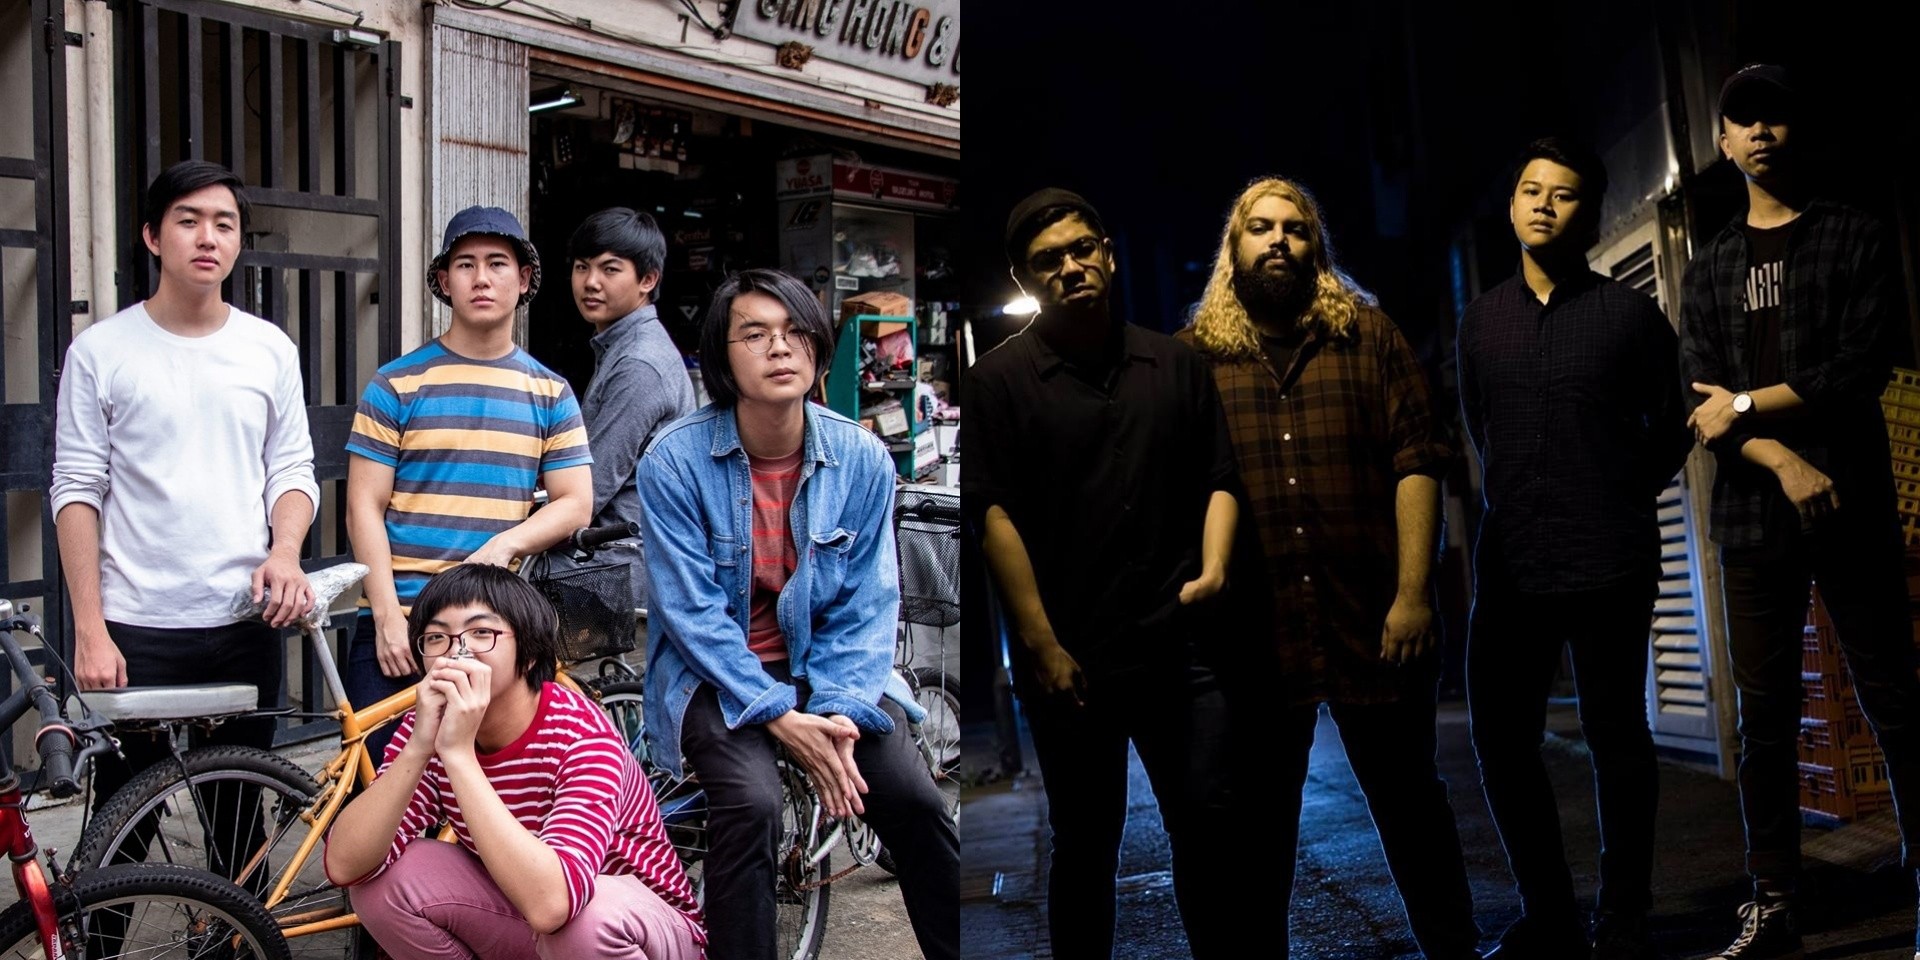 Baybeats Budding Bands 2019: The bands of the Final List share their thoughts